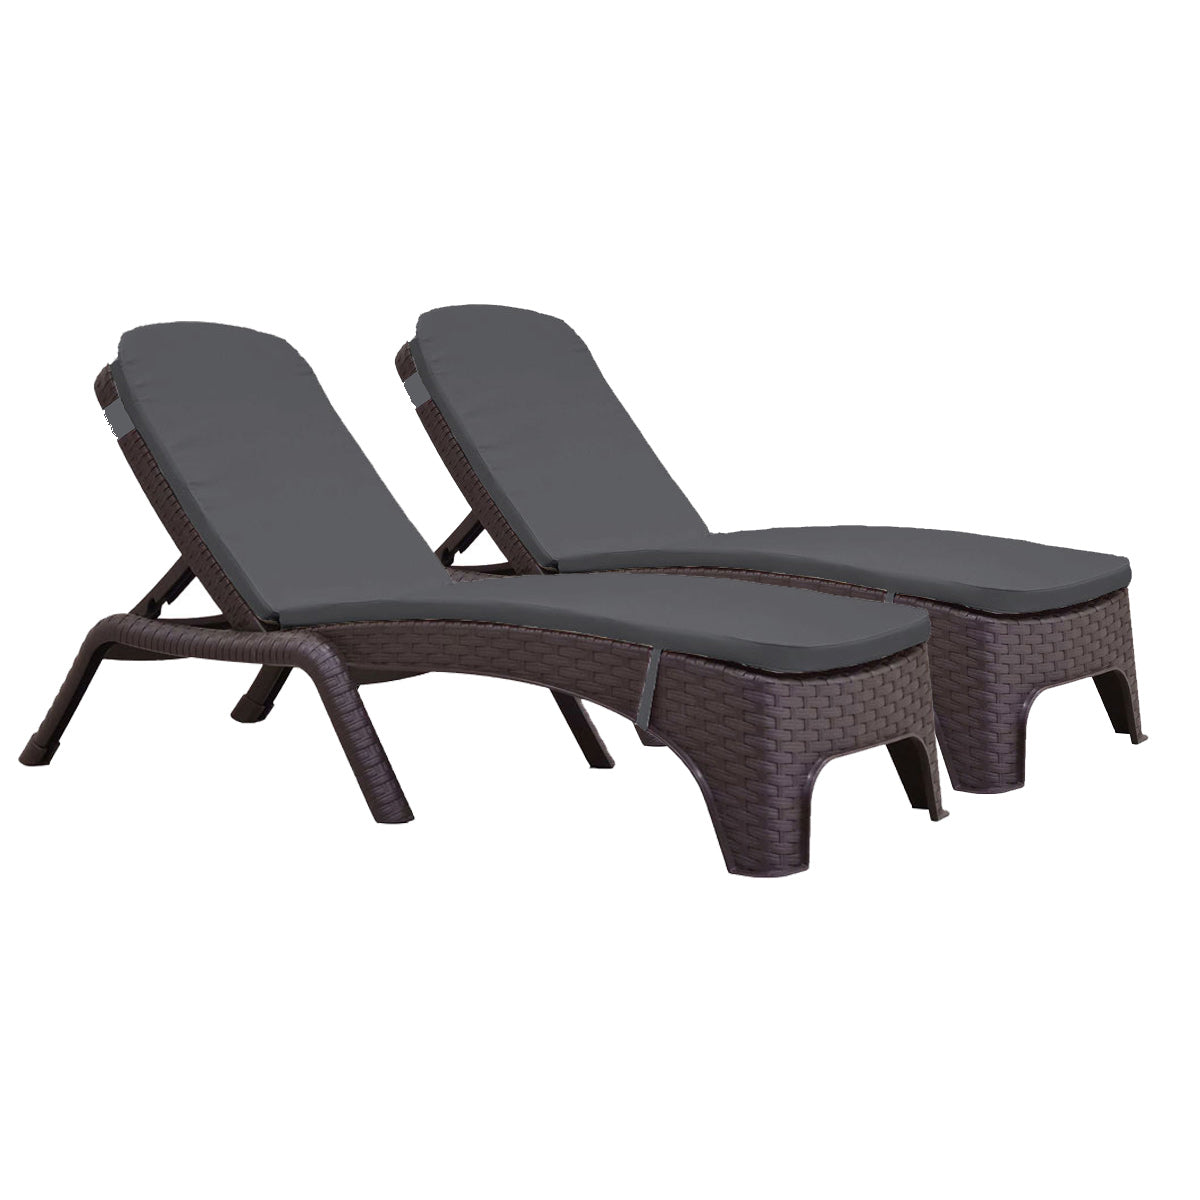 Rainbow Outdoor Roma Set of 2 Chaise Lounger-Brown With Cushion